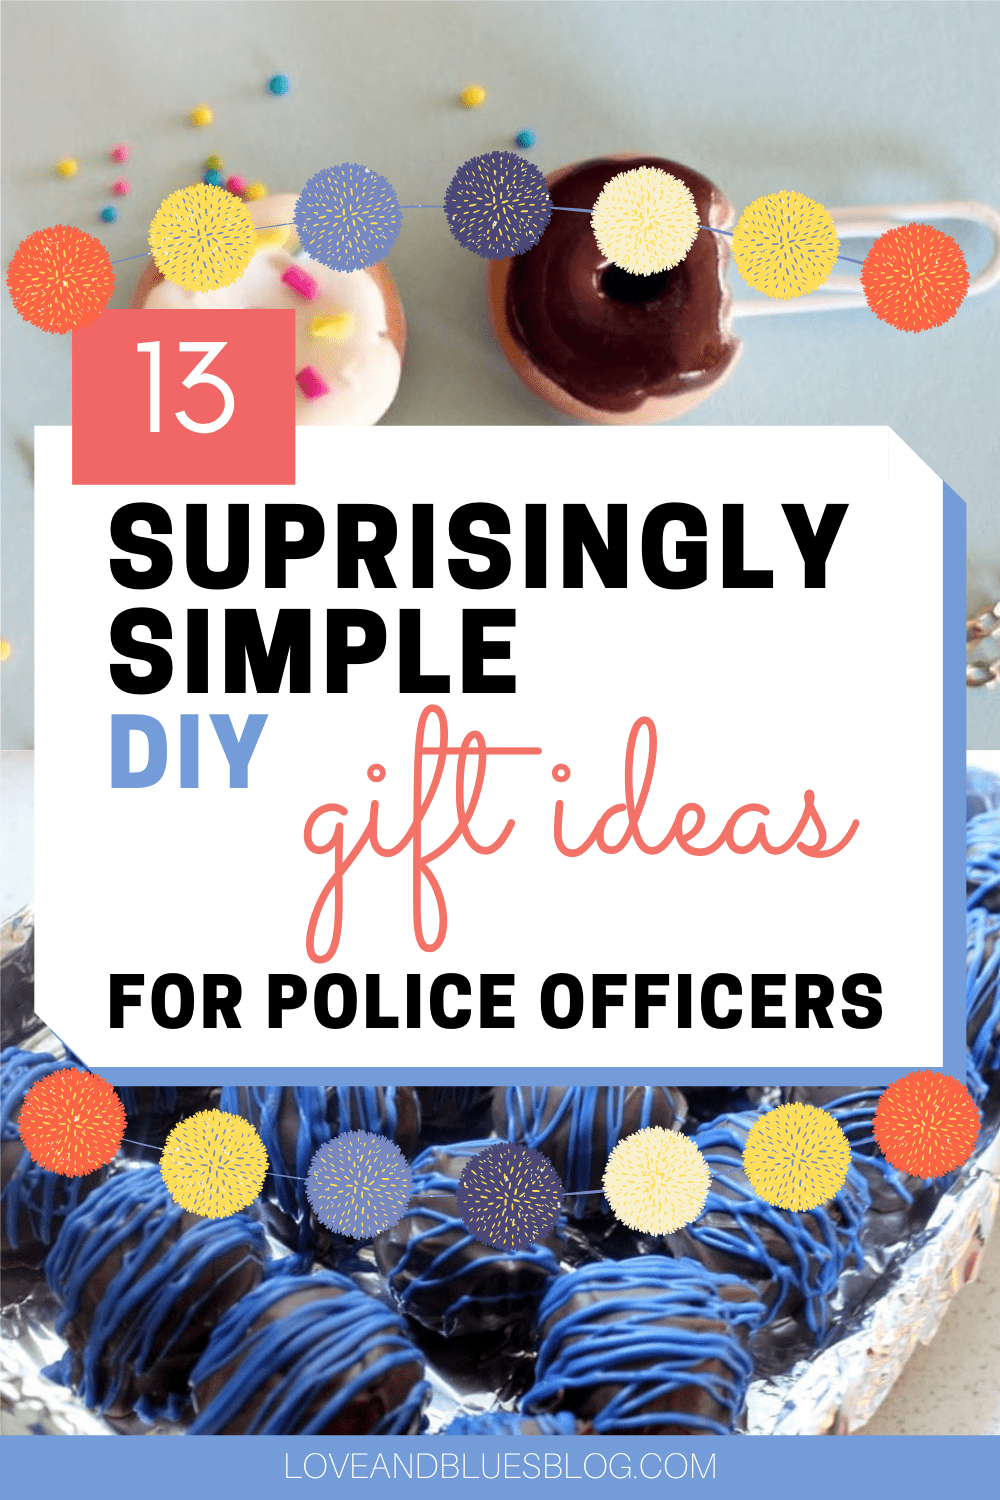 These are GREAT DIY gift ideas for police officers... seriously! I love DIY gifts and couldn't find any I liked for my officer husband. I want to try all these!